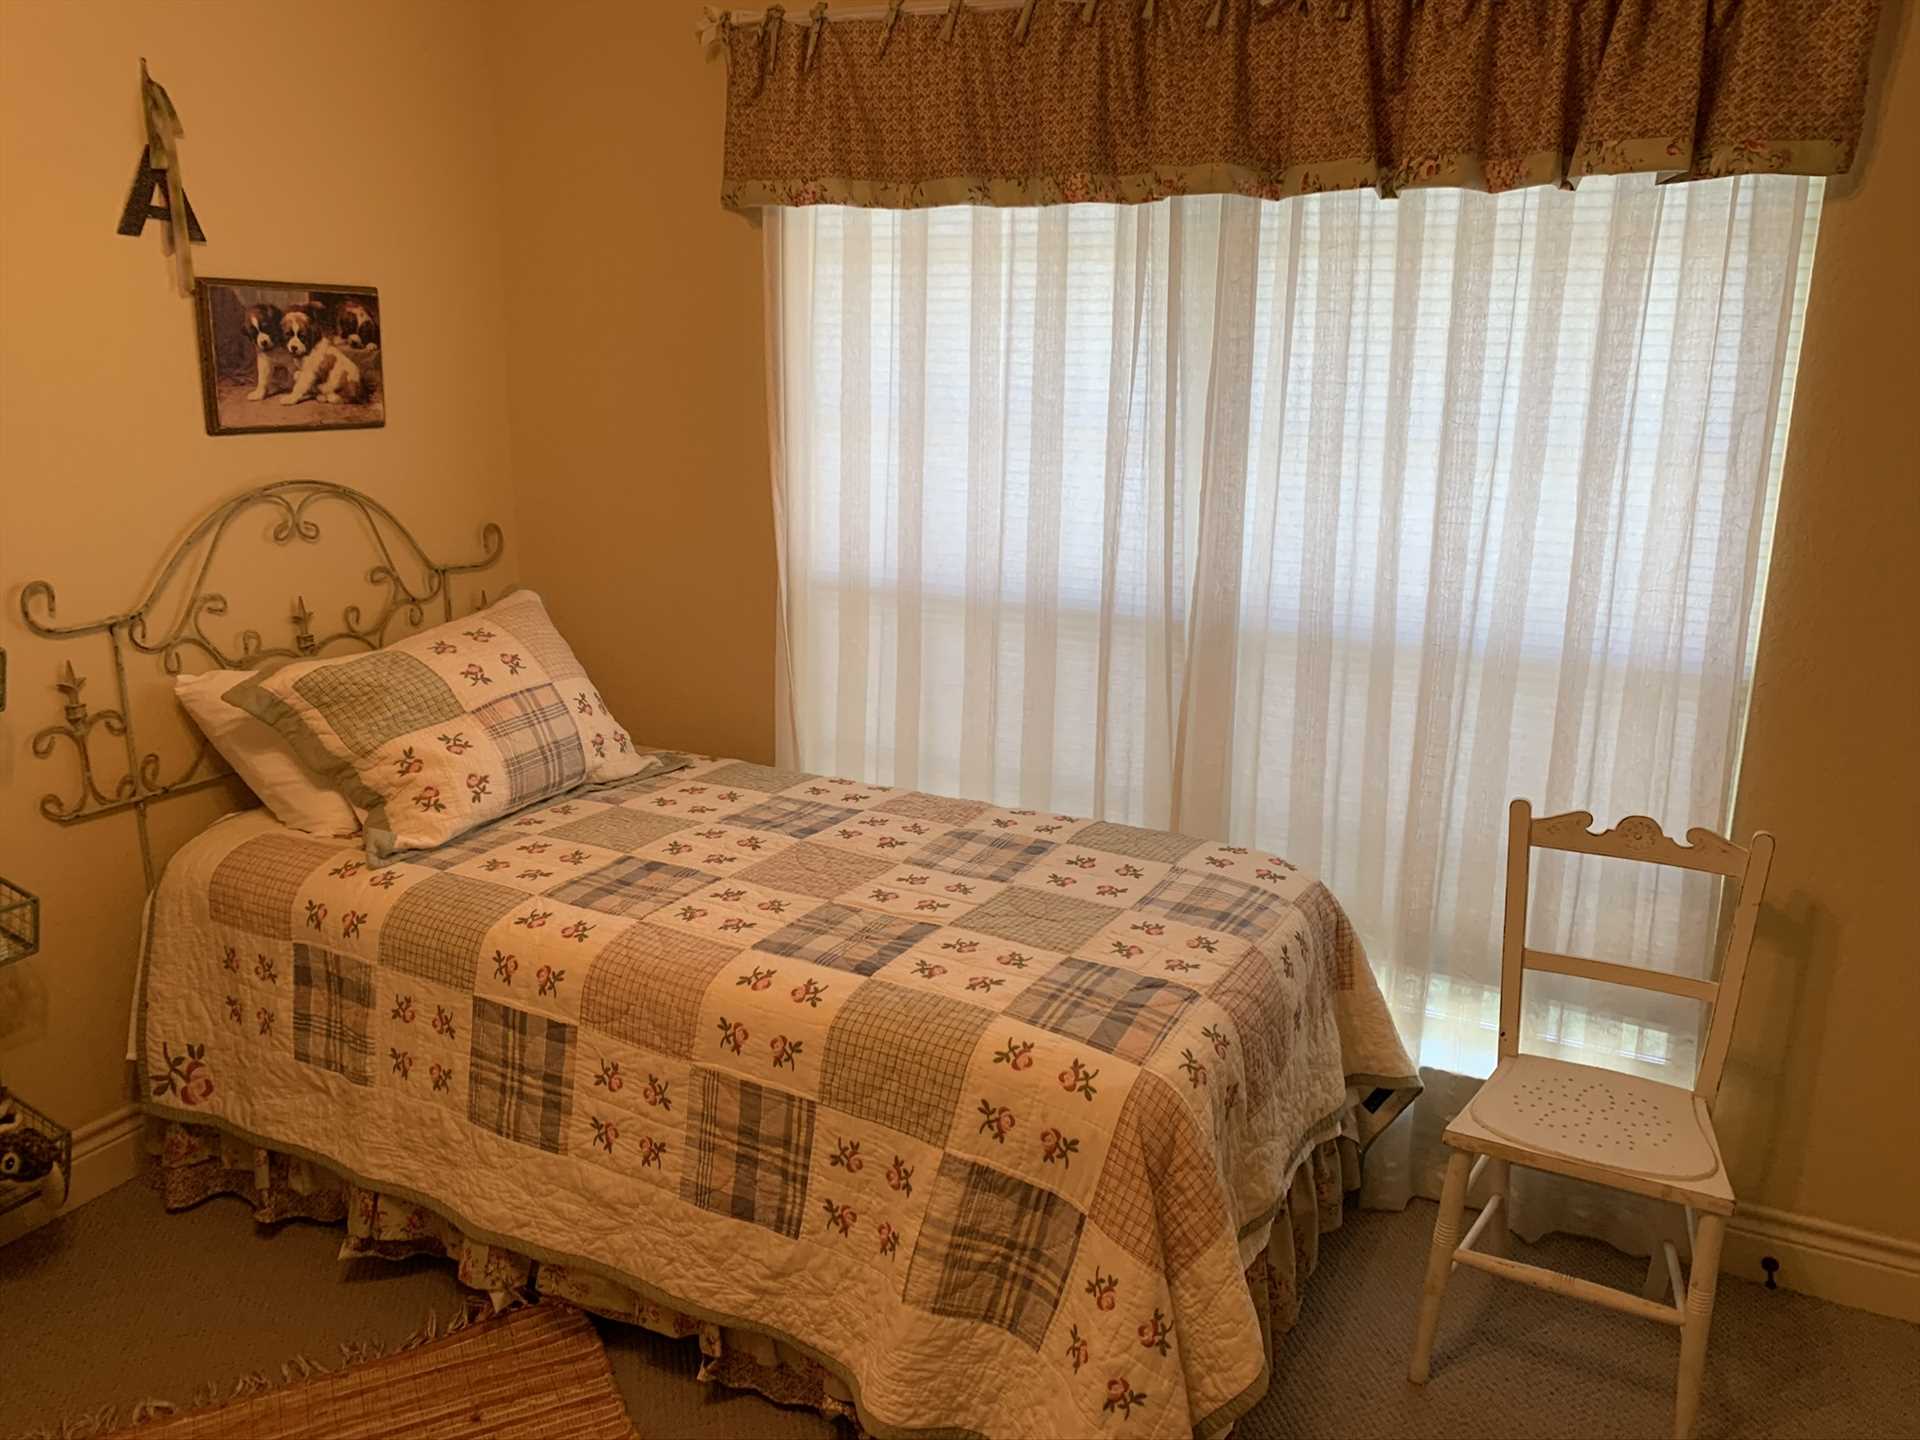                                                 Rounding out the comfortable sleeping accommodations are two twin beds in the third bedroom.